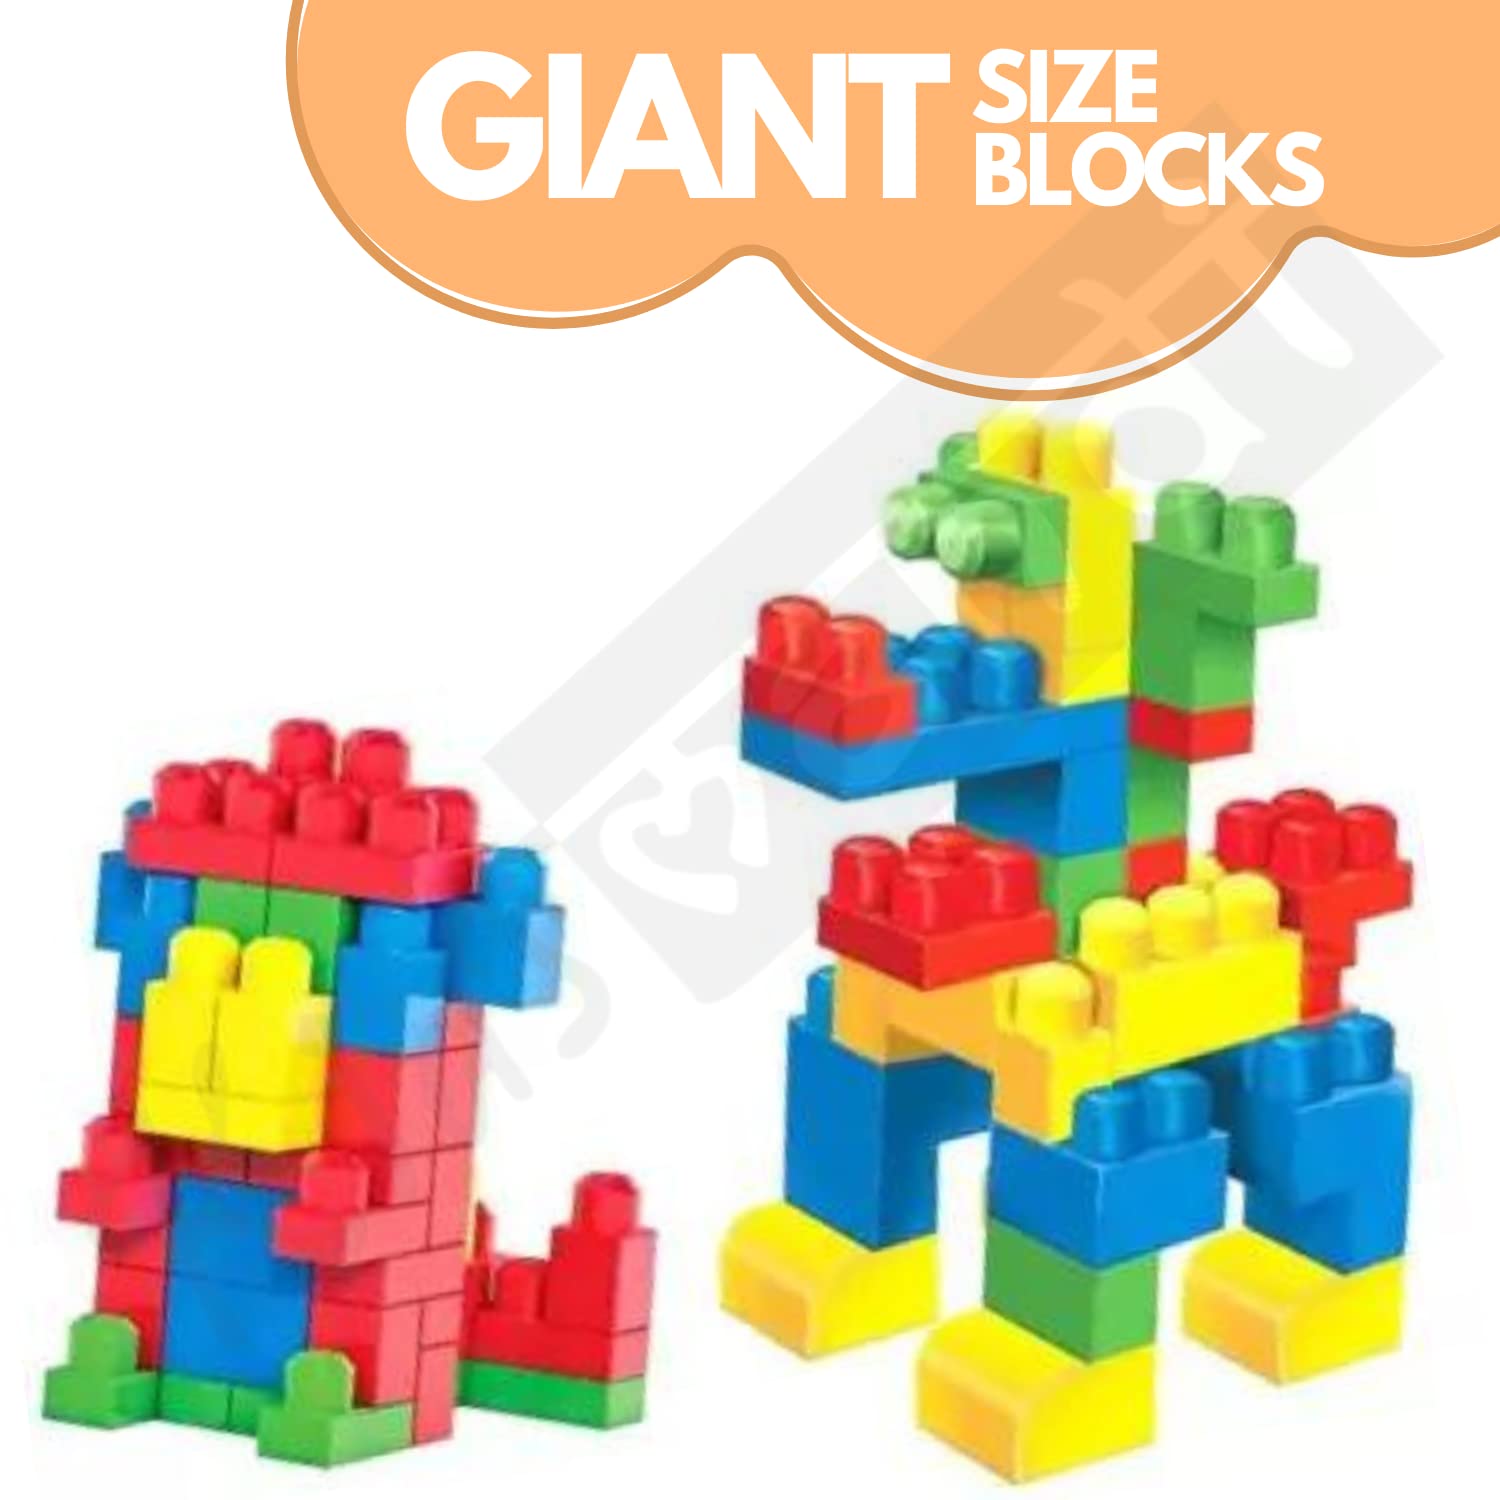 Kids Mandi block toys for all ages, boys, and girls.